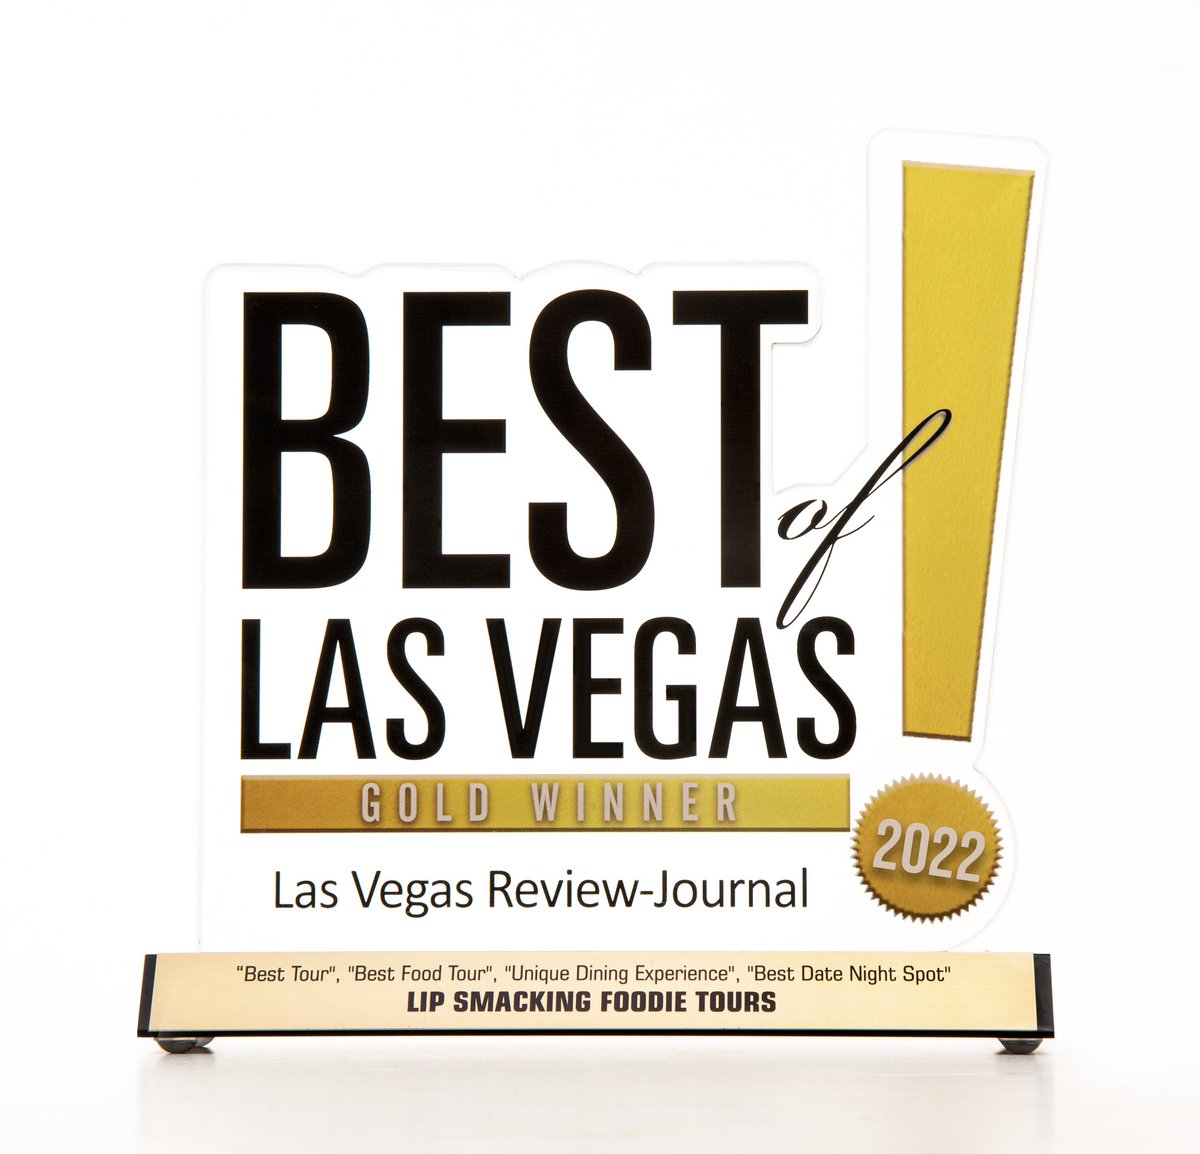 We are thankful for your votes and honored to be awarded Best of Las Vegas by the @reviewjournal 7 years in a row! “Best Tour' “Best Food Tour” “Unique Dining Experience”